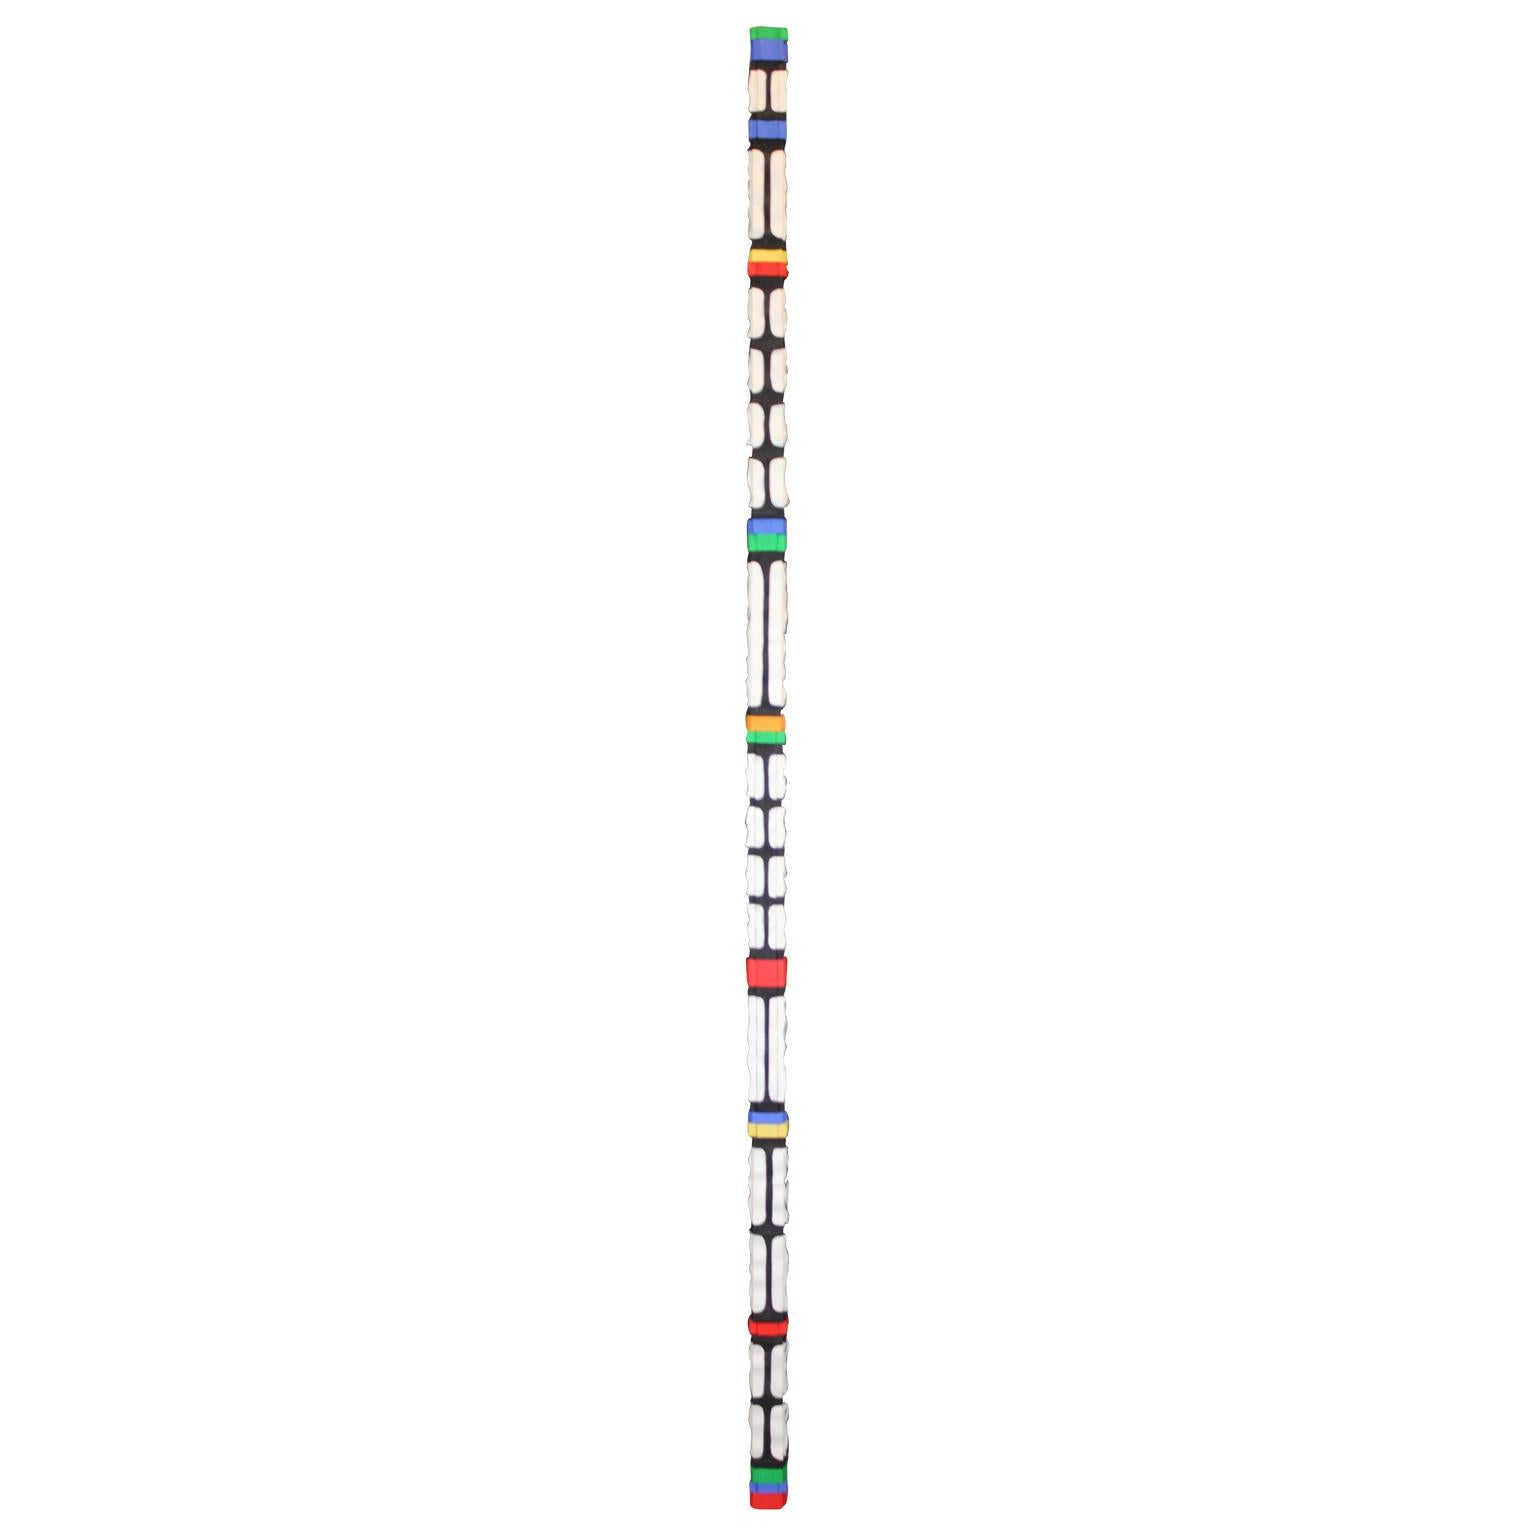 Thunderstick with Primary Color Accents - Contemporary Sculpture by Bill Sullivan